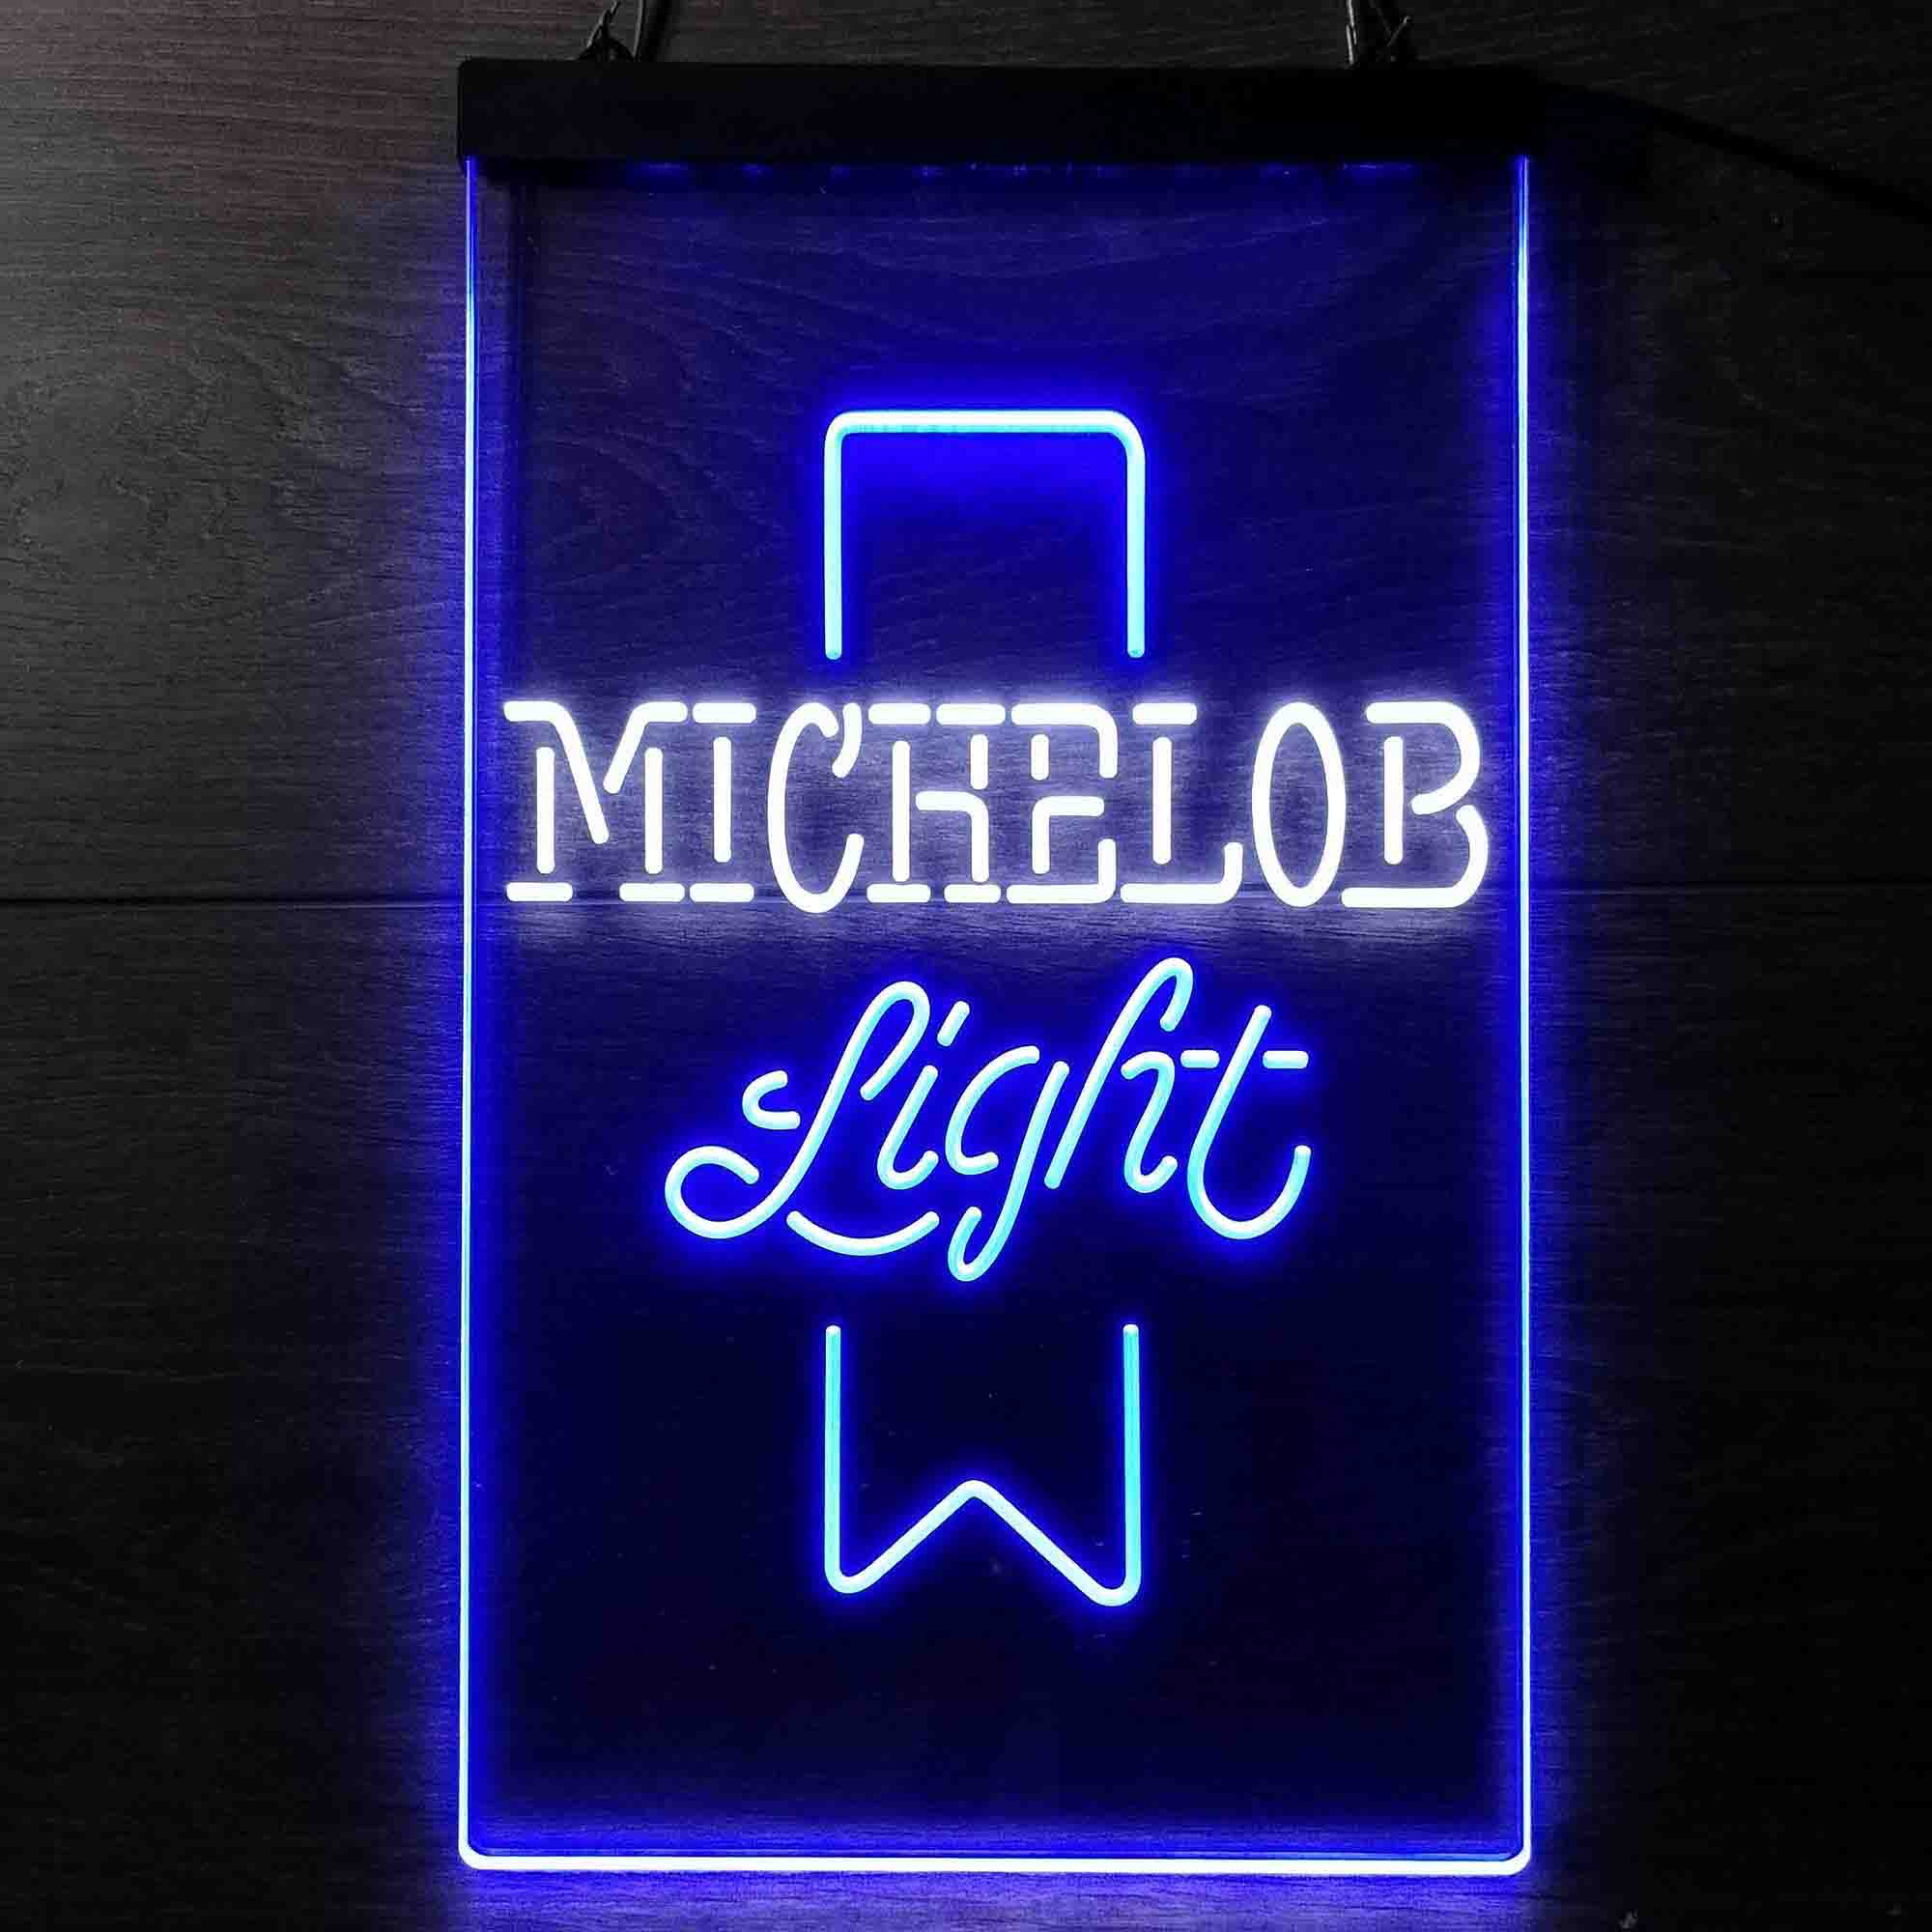 Michelob Light Red Ribbon Neon-Like LED Sign